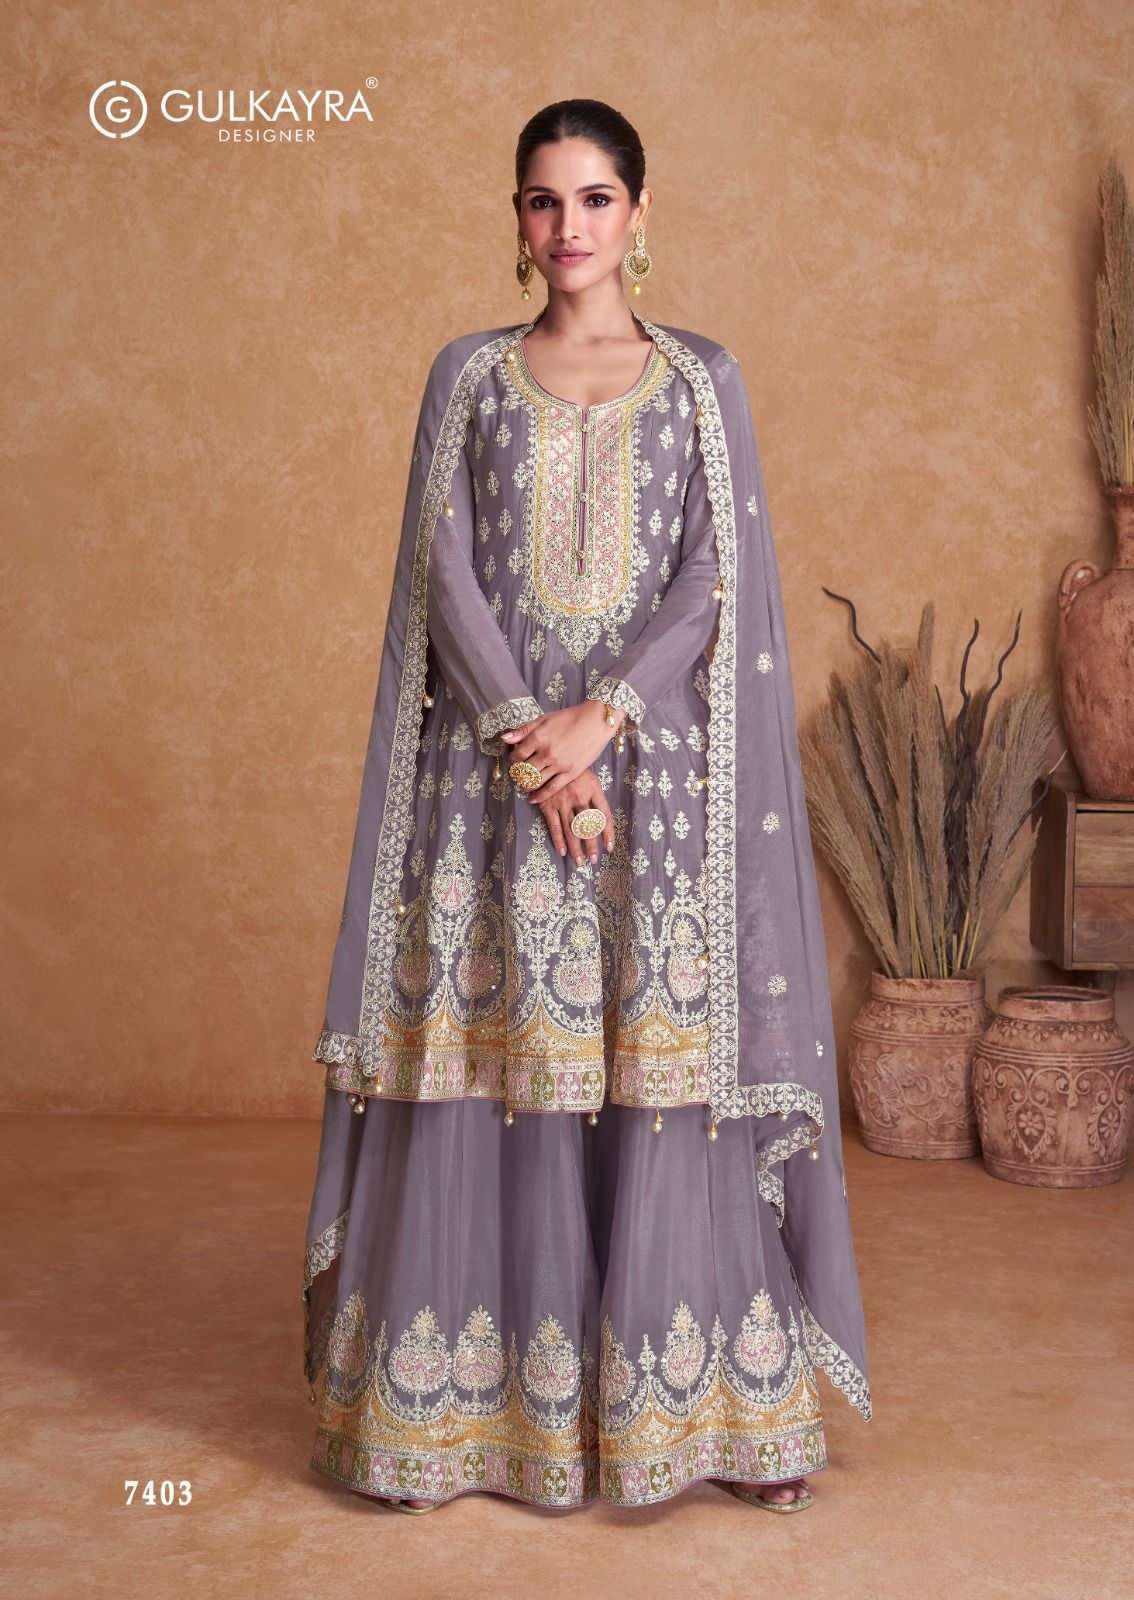 gulkayra designer catalogue flory series 7403 to 7405 designer heavy embroidery partywear sharara suit collection catalogue branded sharara suit 